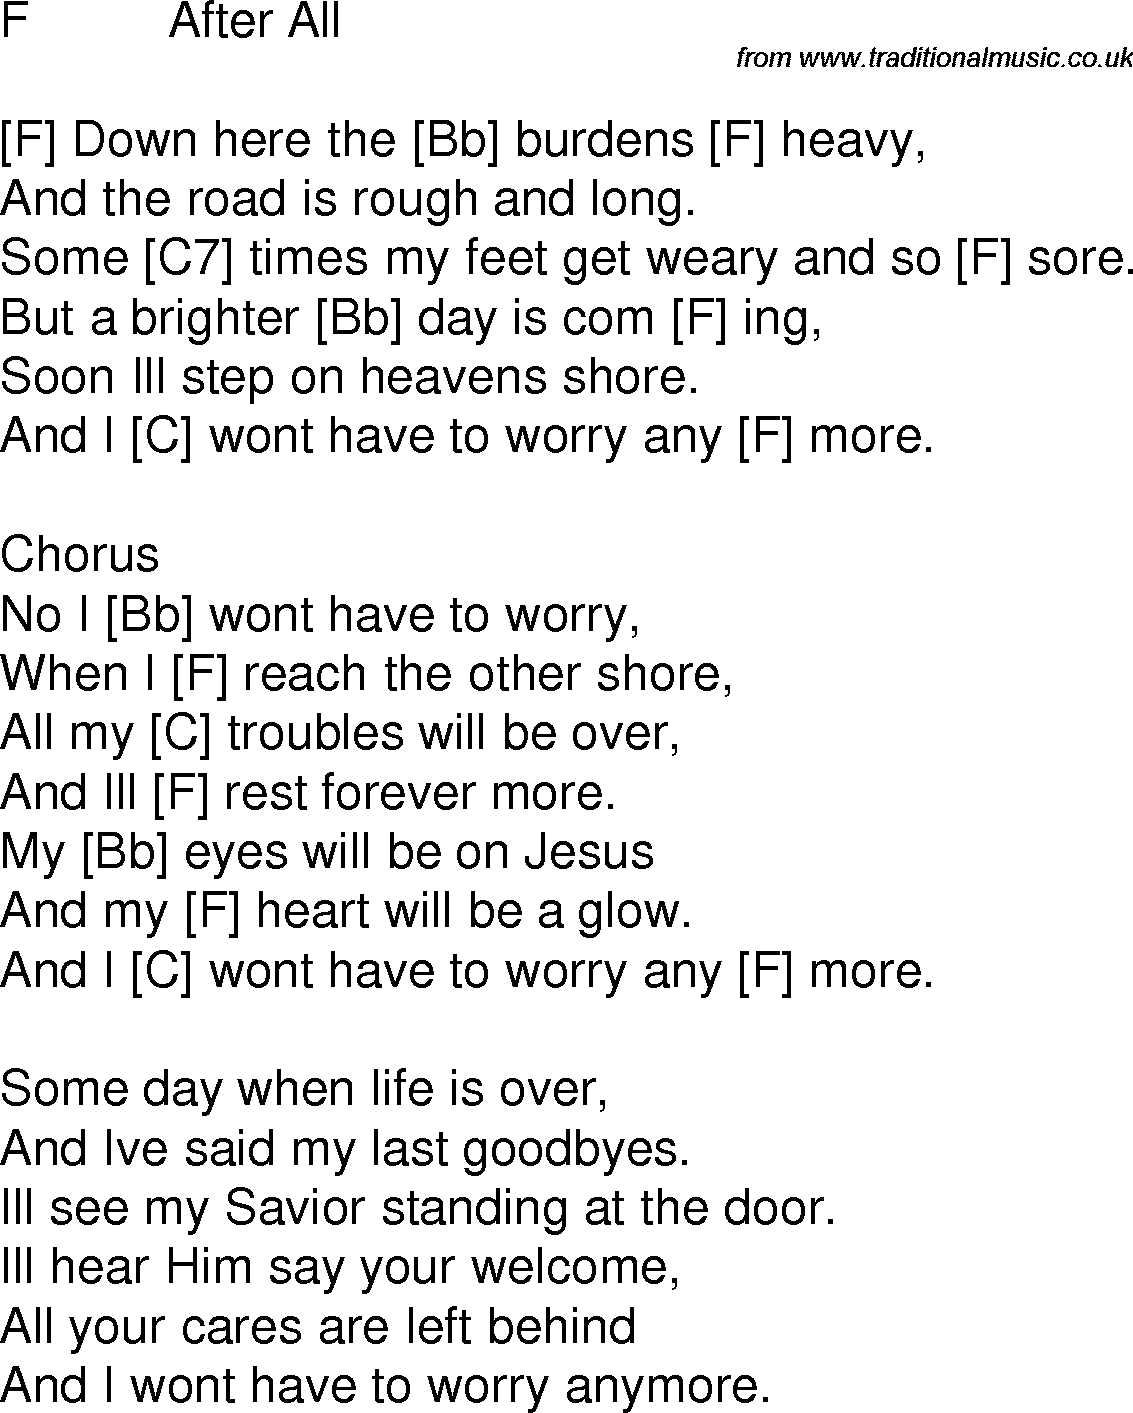 Old time song lyrics with chords for After All F.txt